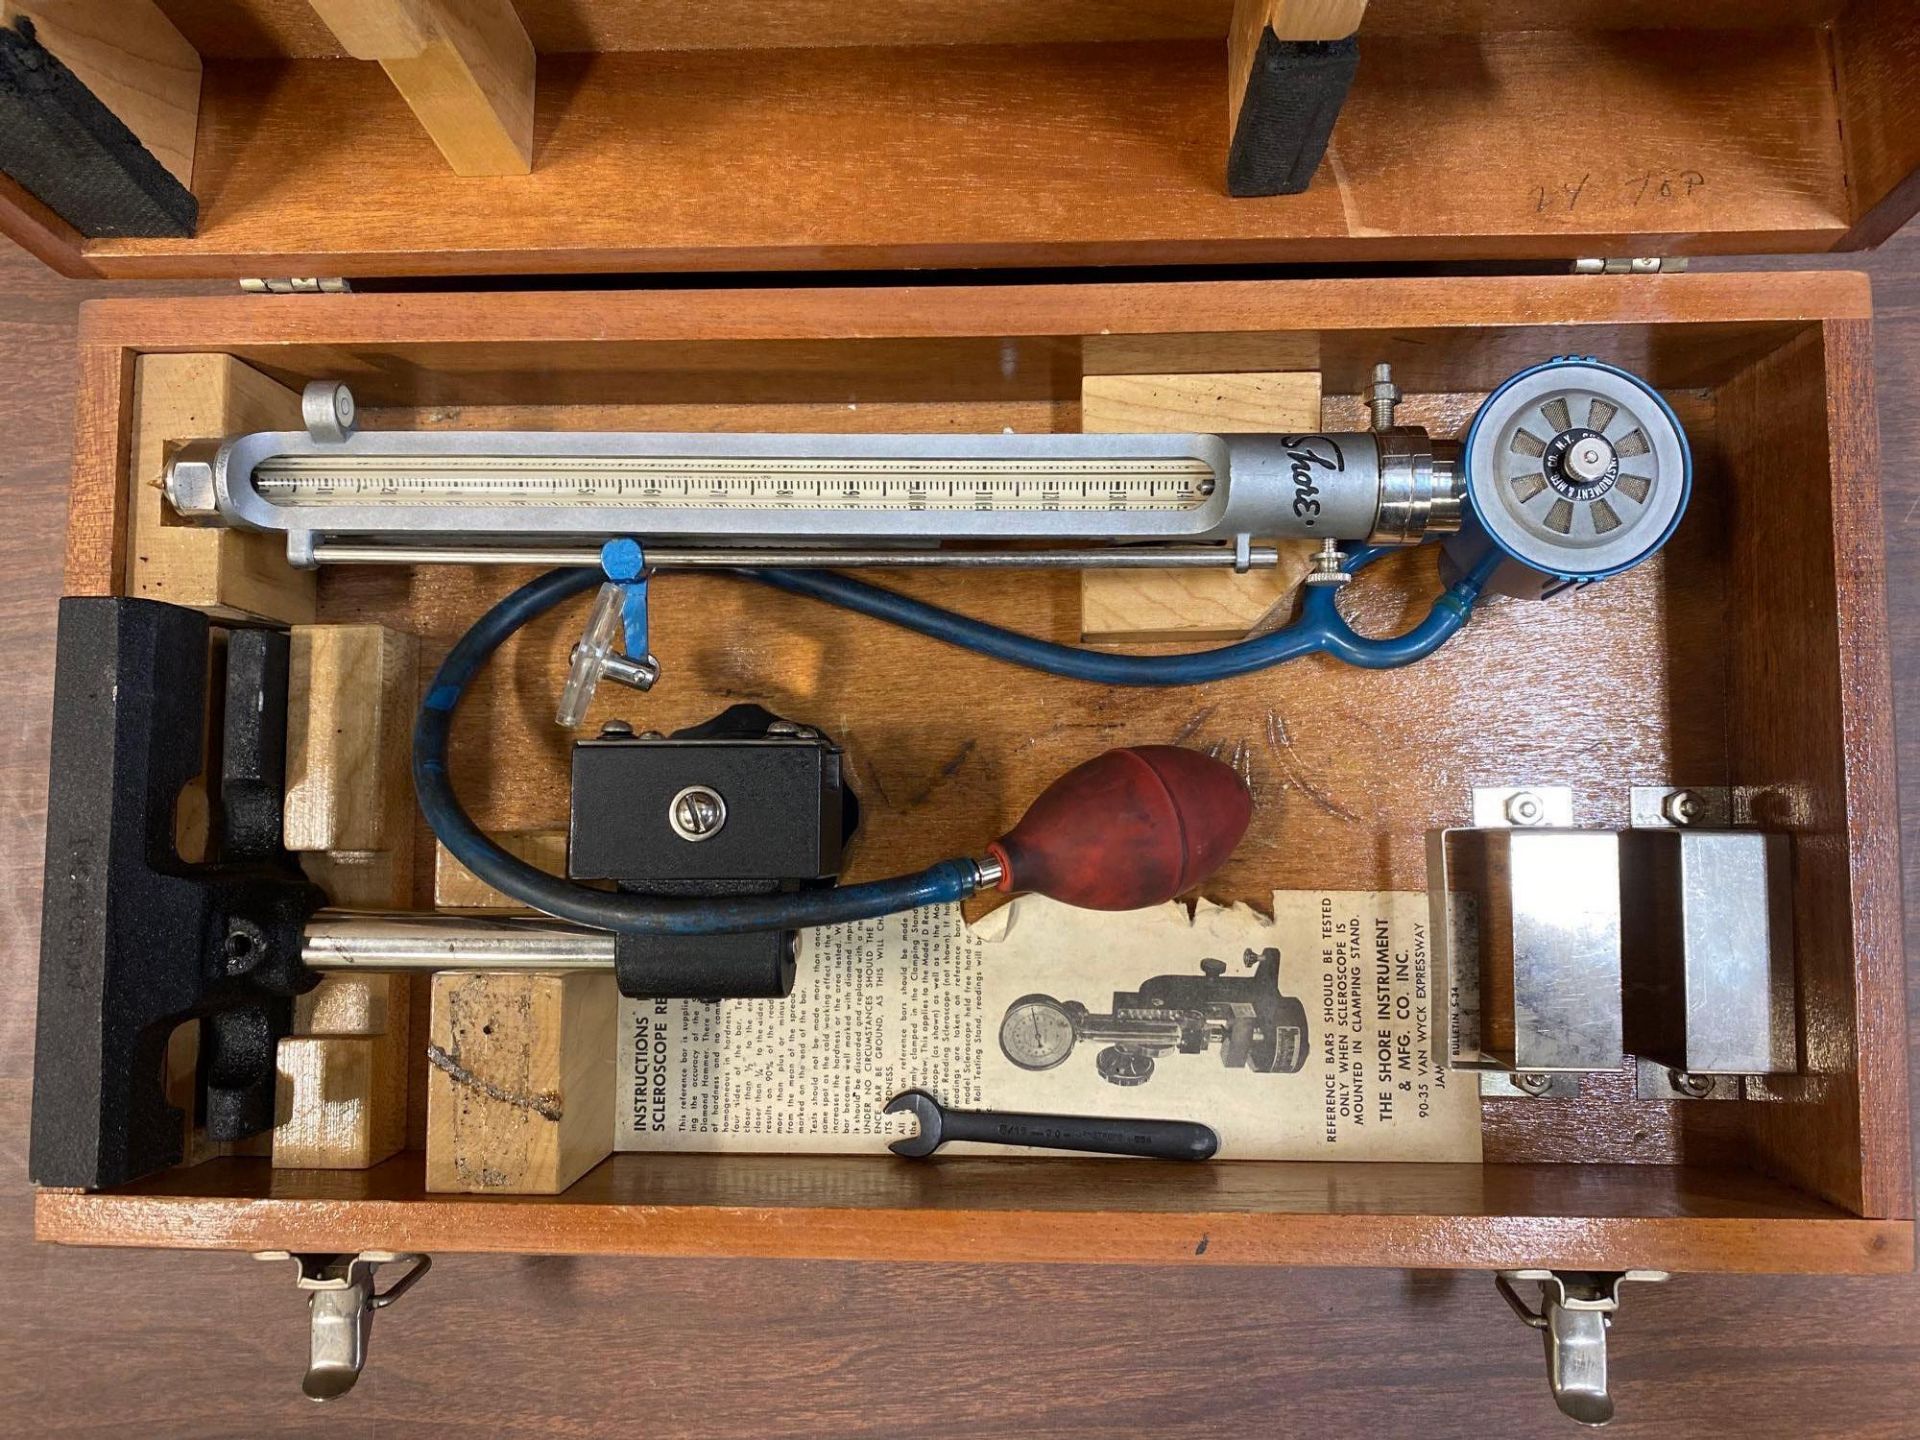 The Shore Instrument & Mfg. Co. Scleroscope & King Brinell Scope - Image 5 of 22